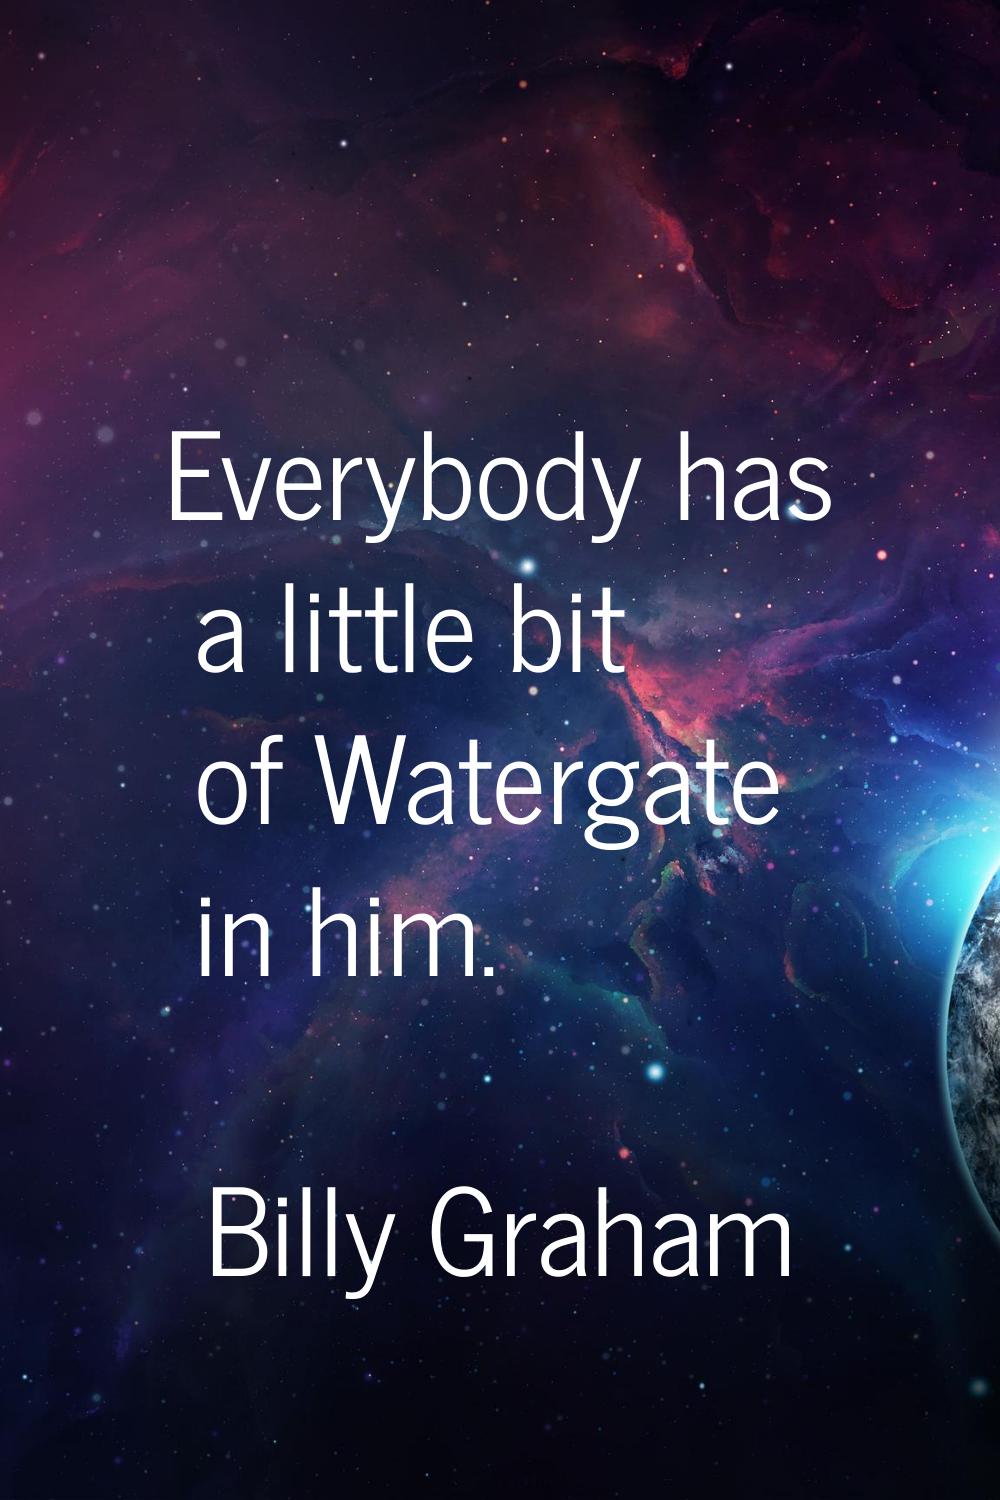 Everybody has a little bit of Watergate in him.